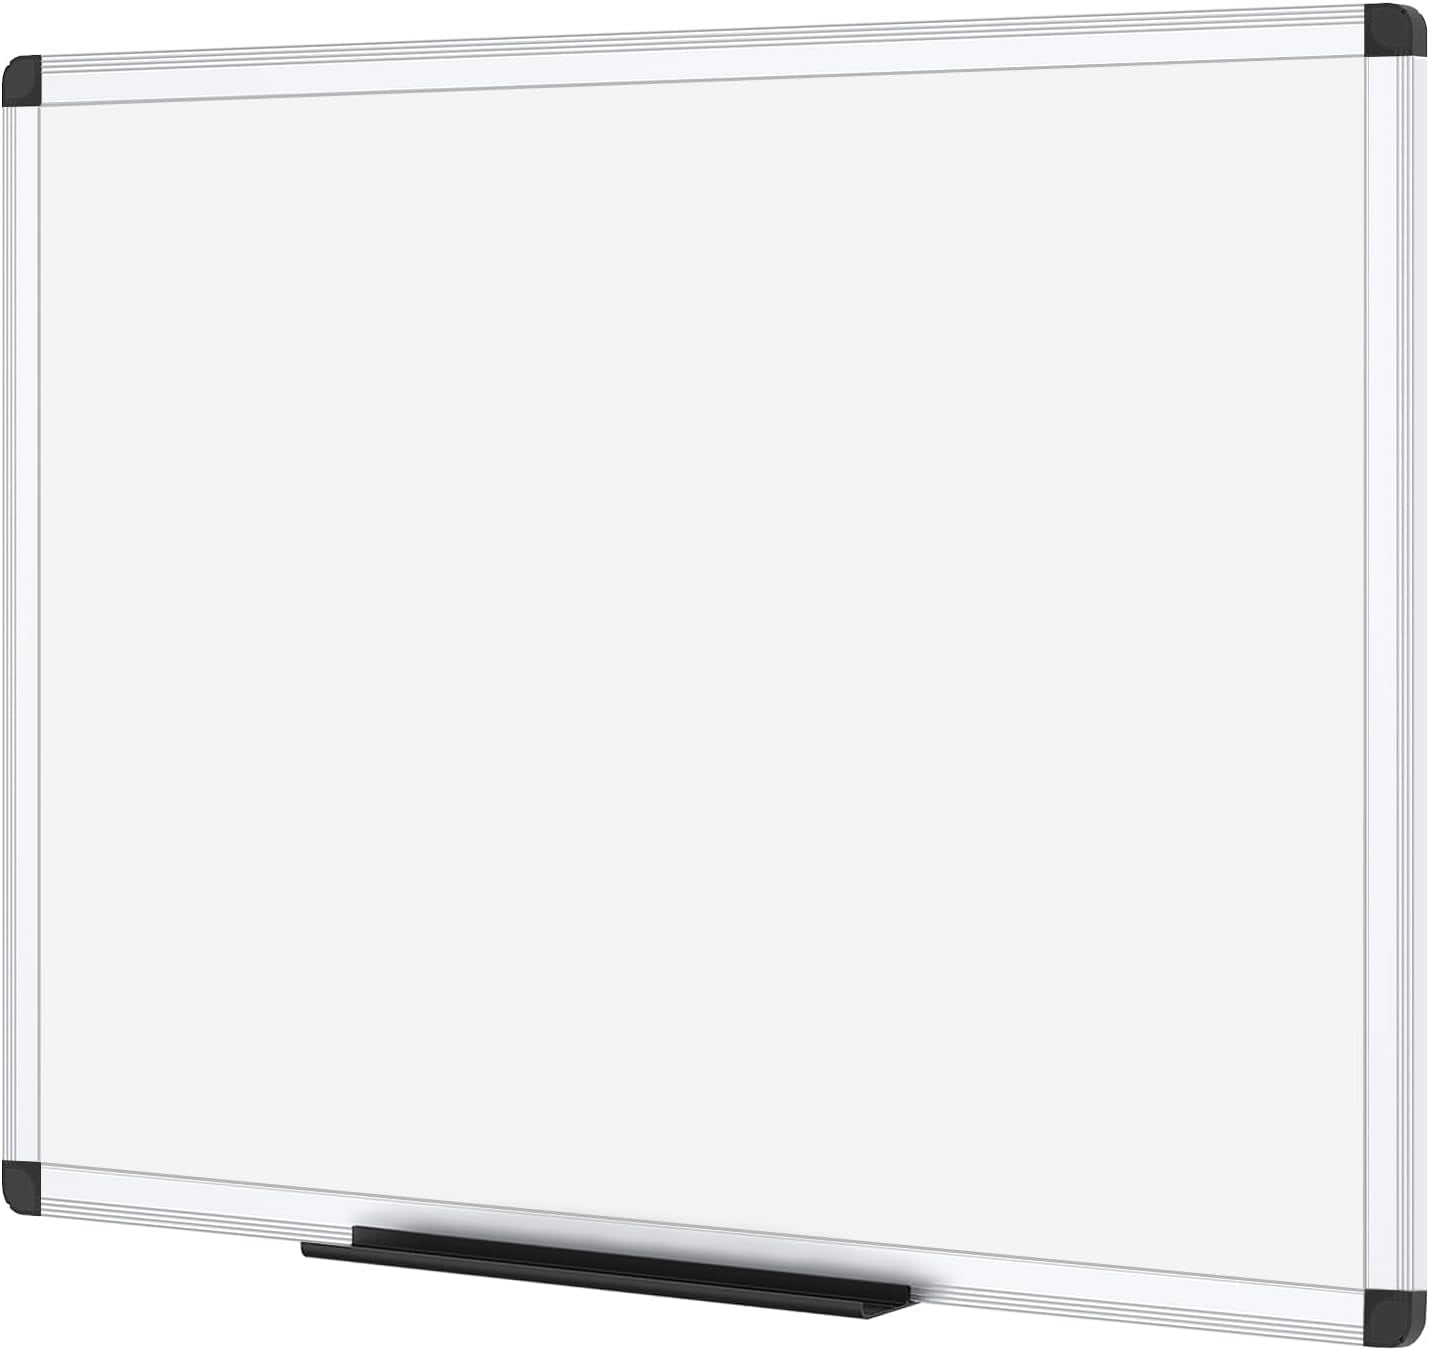 VIZ-PRO Magnetic H-Stand Whiteboard/Adjustable Dry Erase Easel,36 X 48  Inches